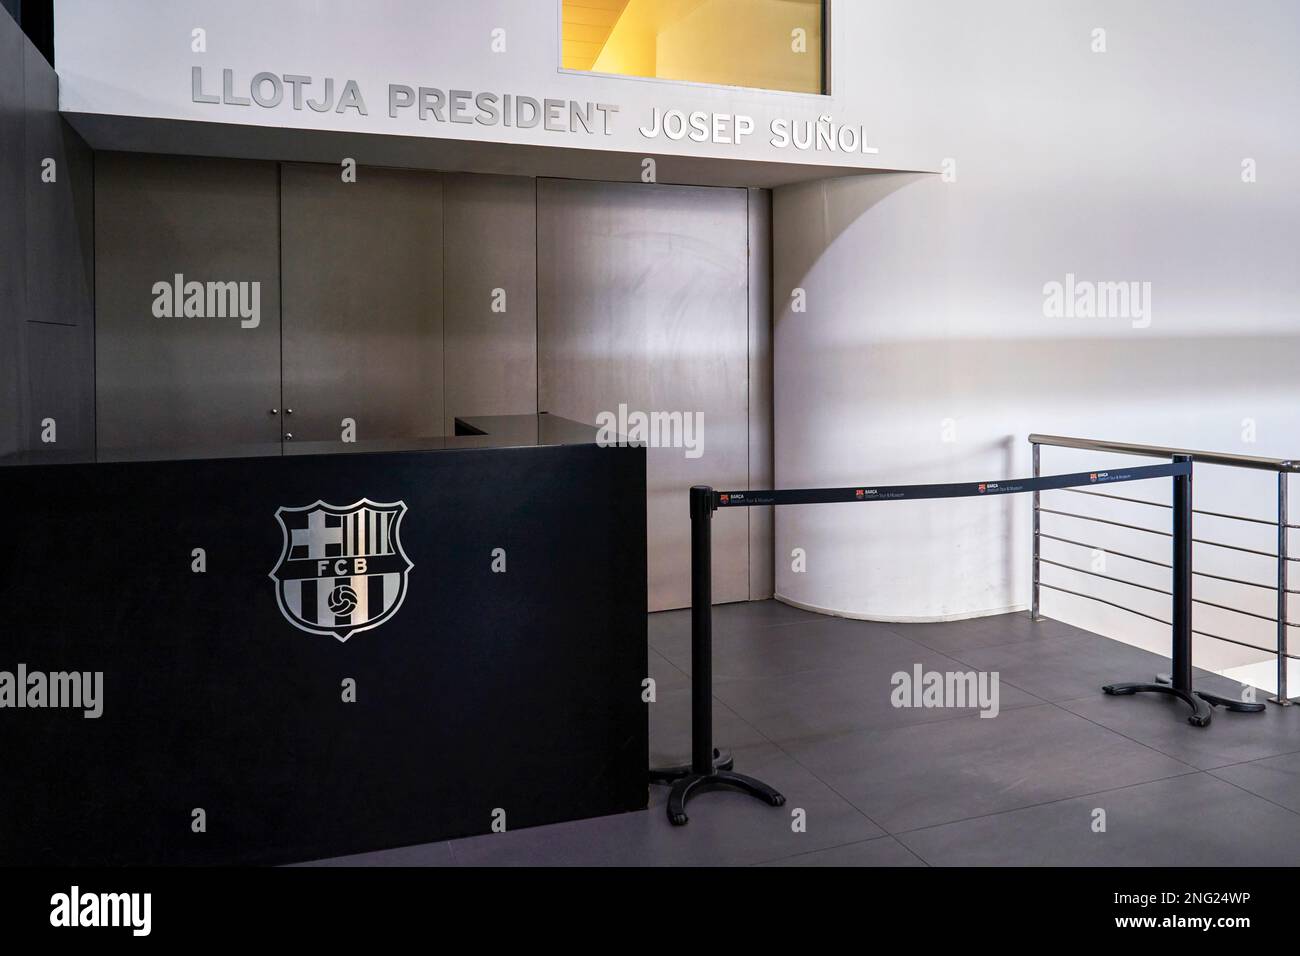 Presidential lounge at Camp Nou arena - the official playground of FC Barcelona Stock Photo